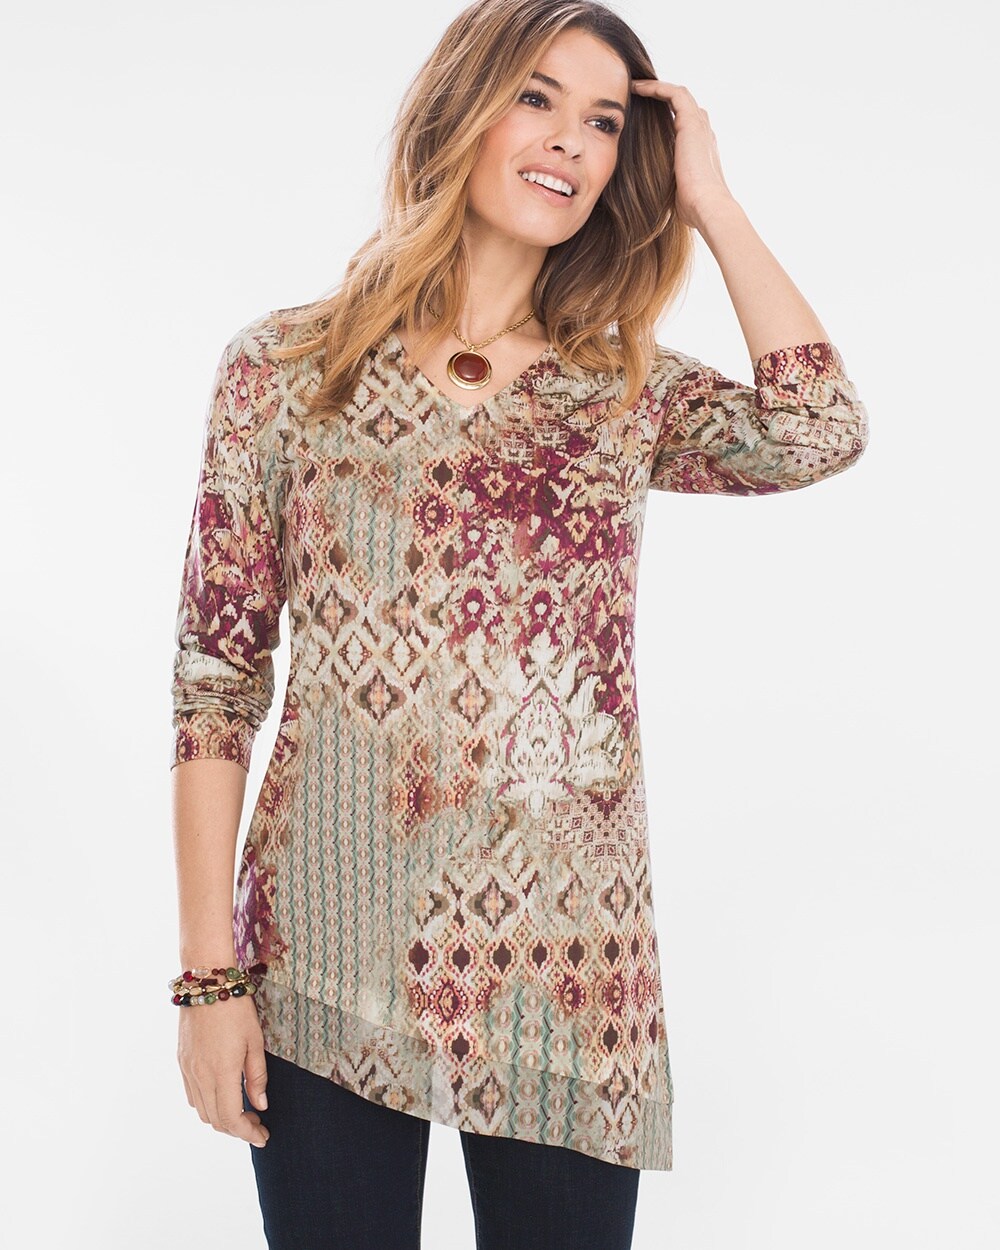 Patch Paisley Top